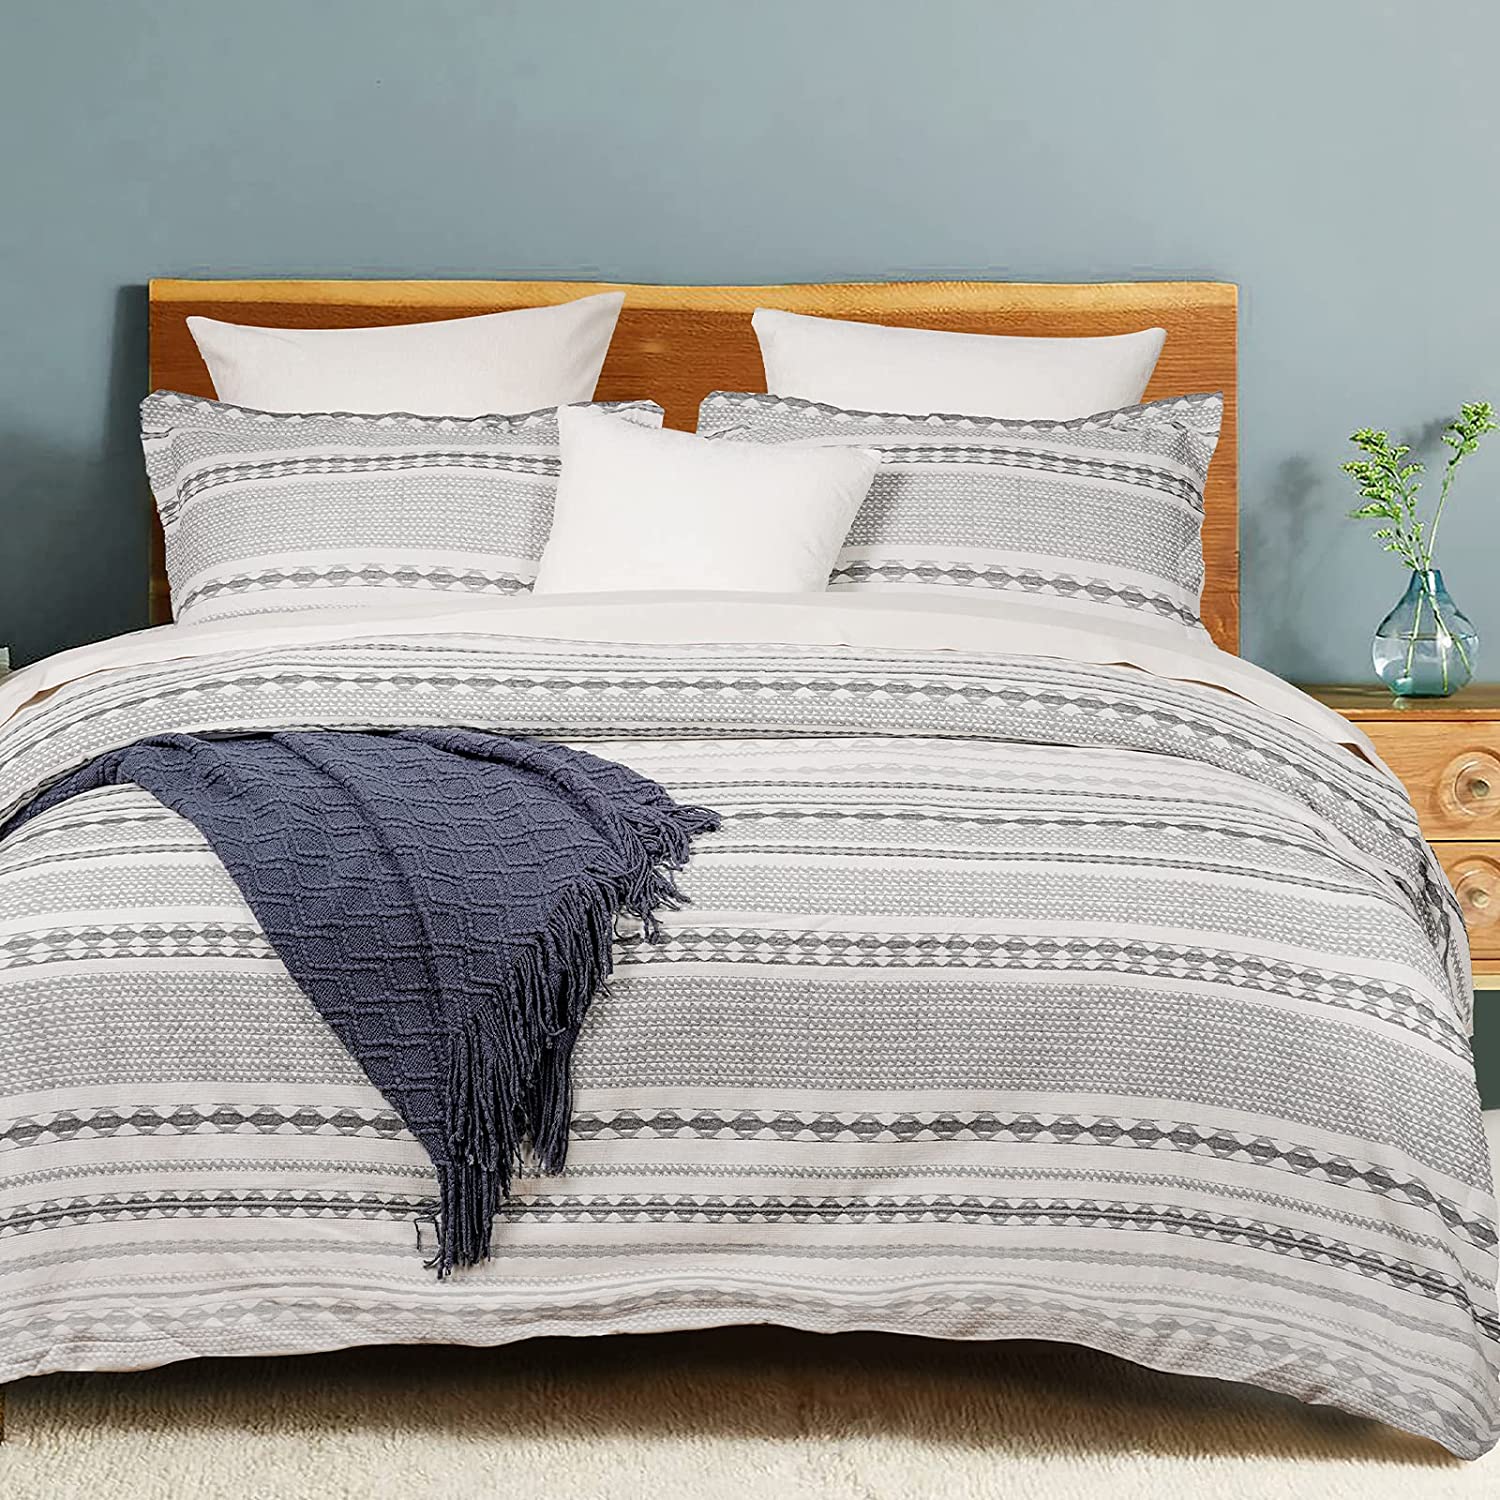 Price:$74.99  100% Cotton Jacquard Duvet Cover Set King Size, 3pcs Boho Textured Comforter Cover Set, Yarn-Dyed Farmhouse Duvet Cover with Pillow Shams Bedding Collection, 106"x 92", Grey and Cream : Home & Kitchen